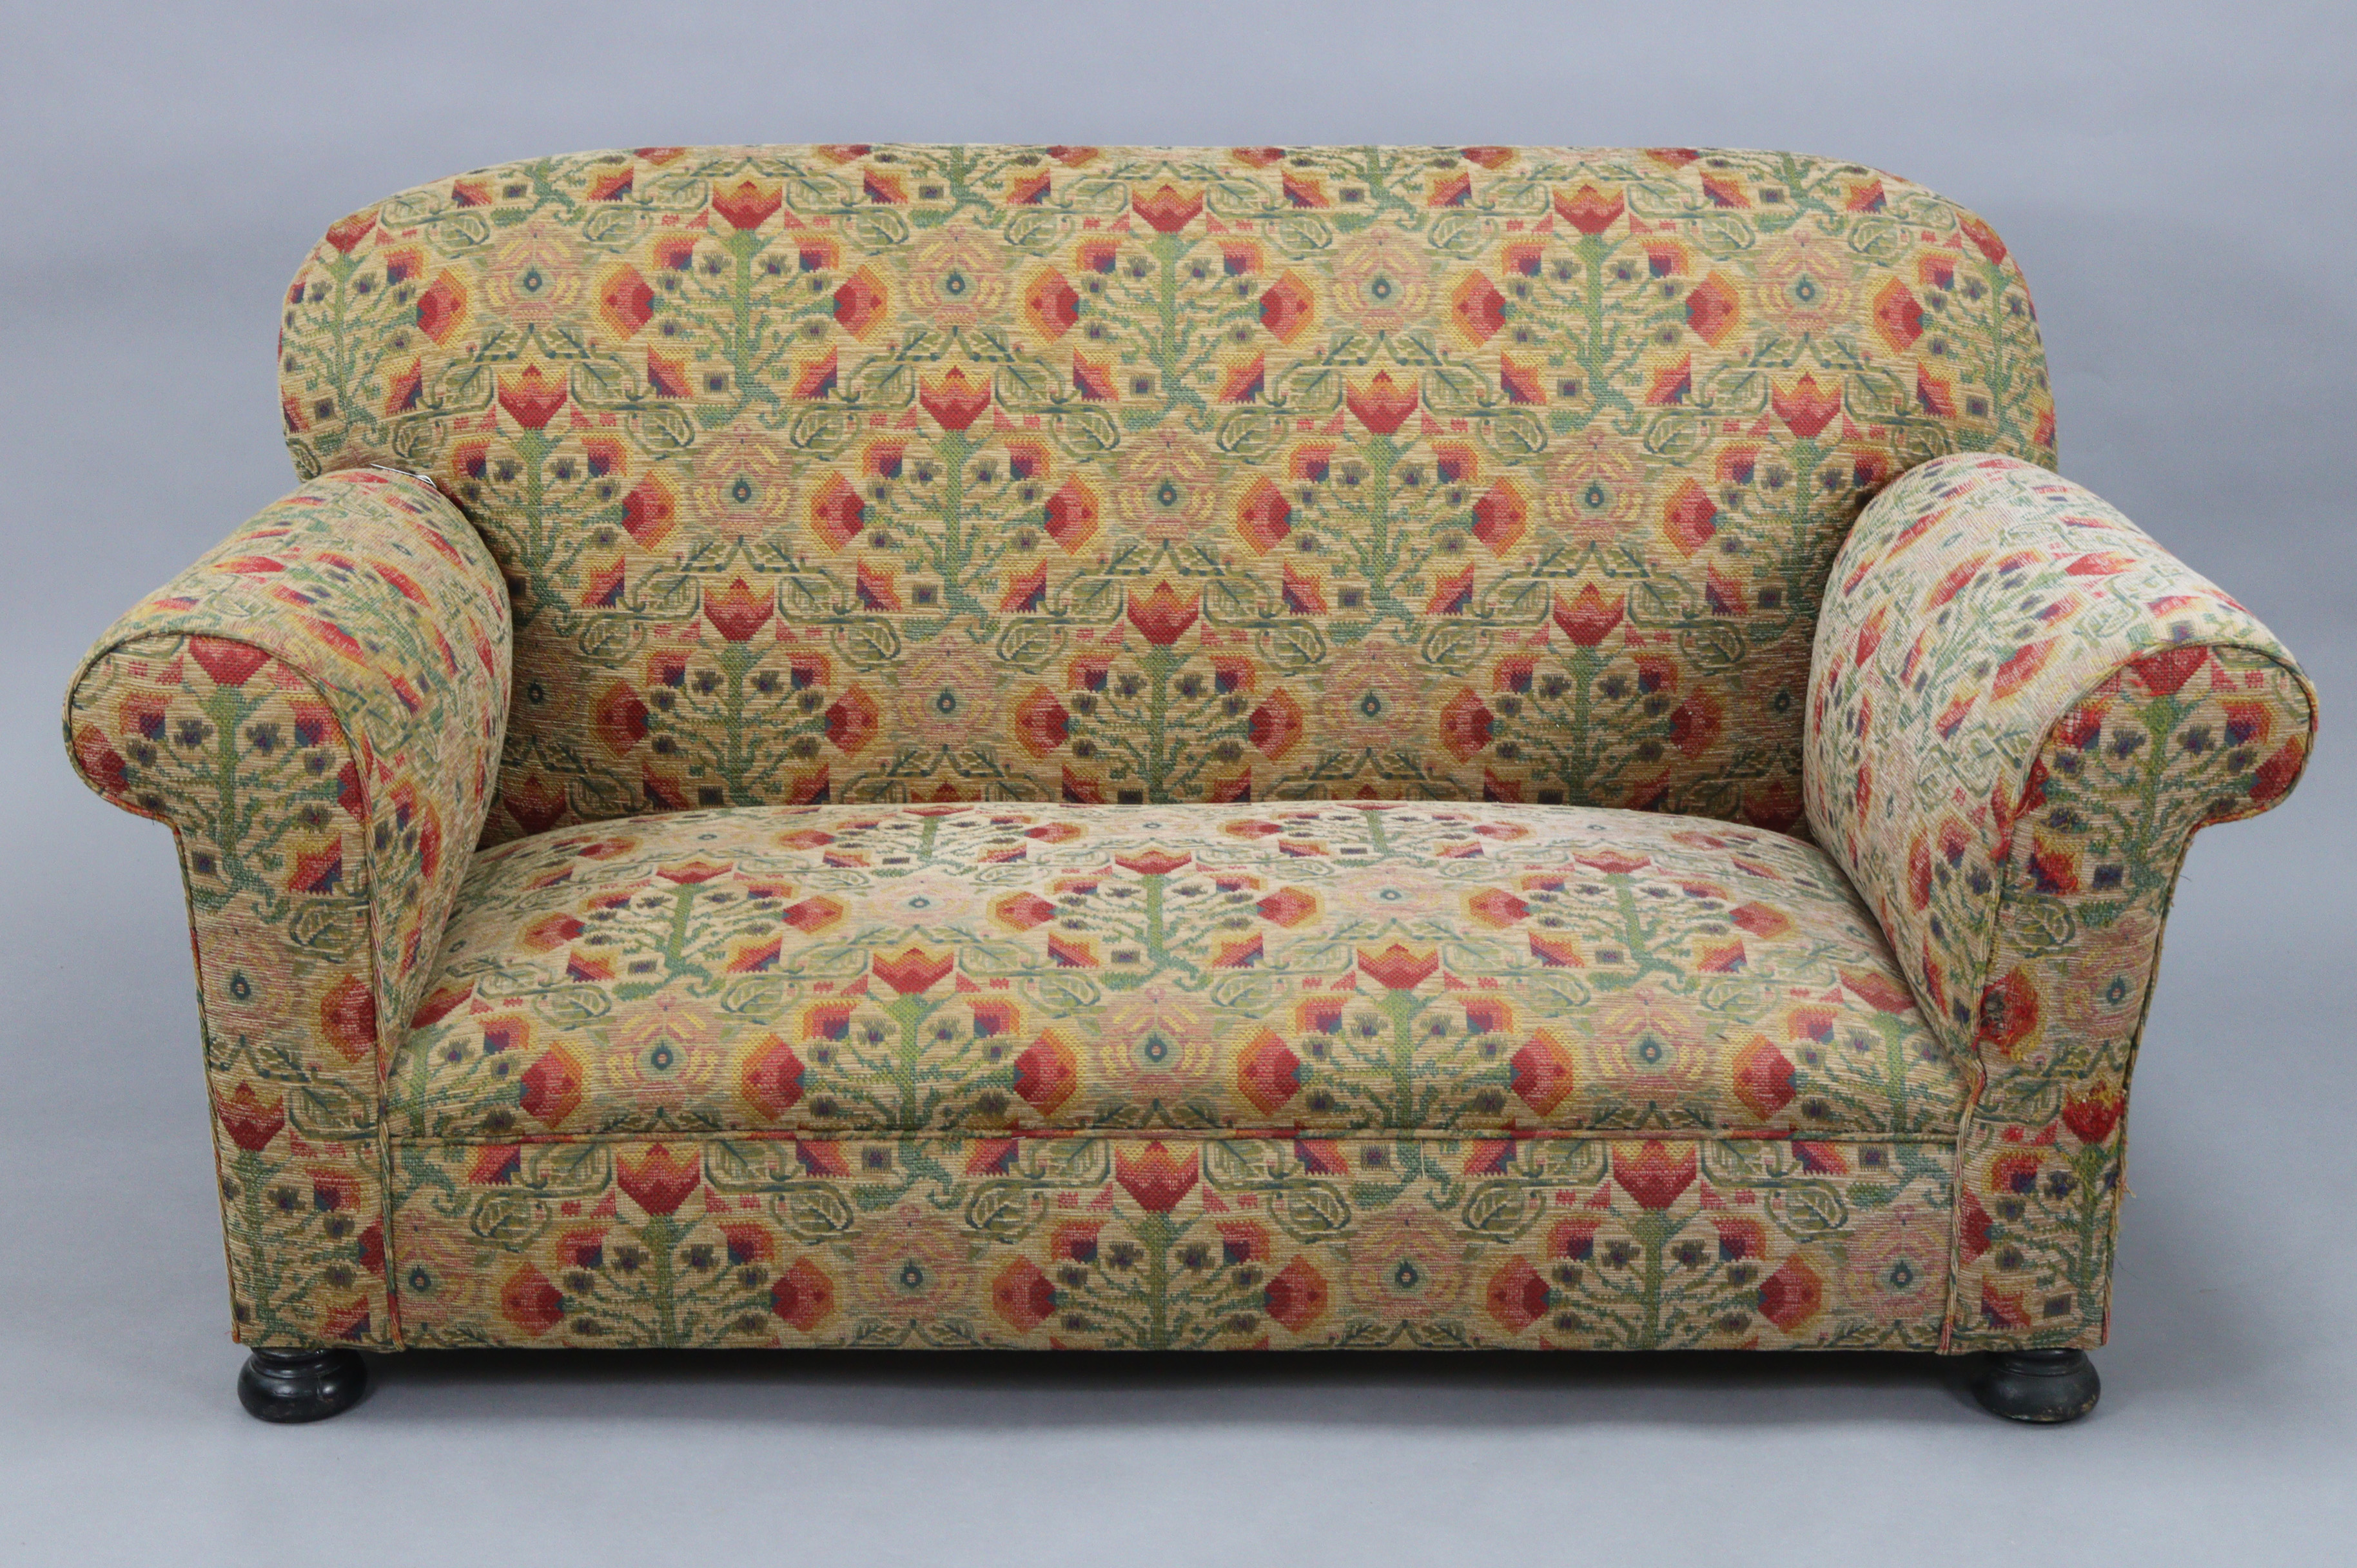 An early 20th century drop-end two-seater settee with rounded back, scroll-arms & sprung seat